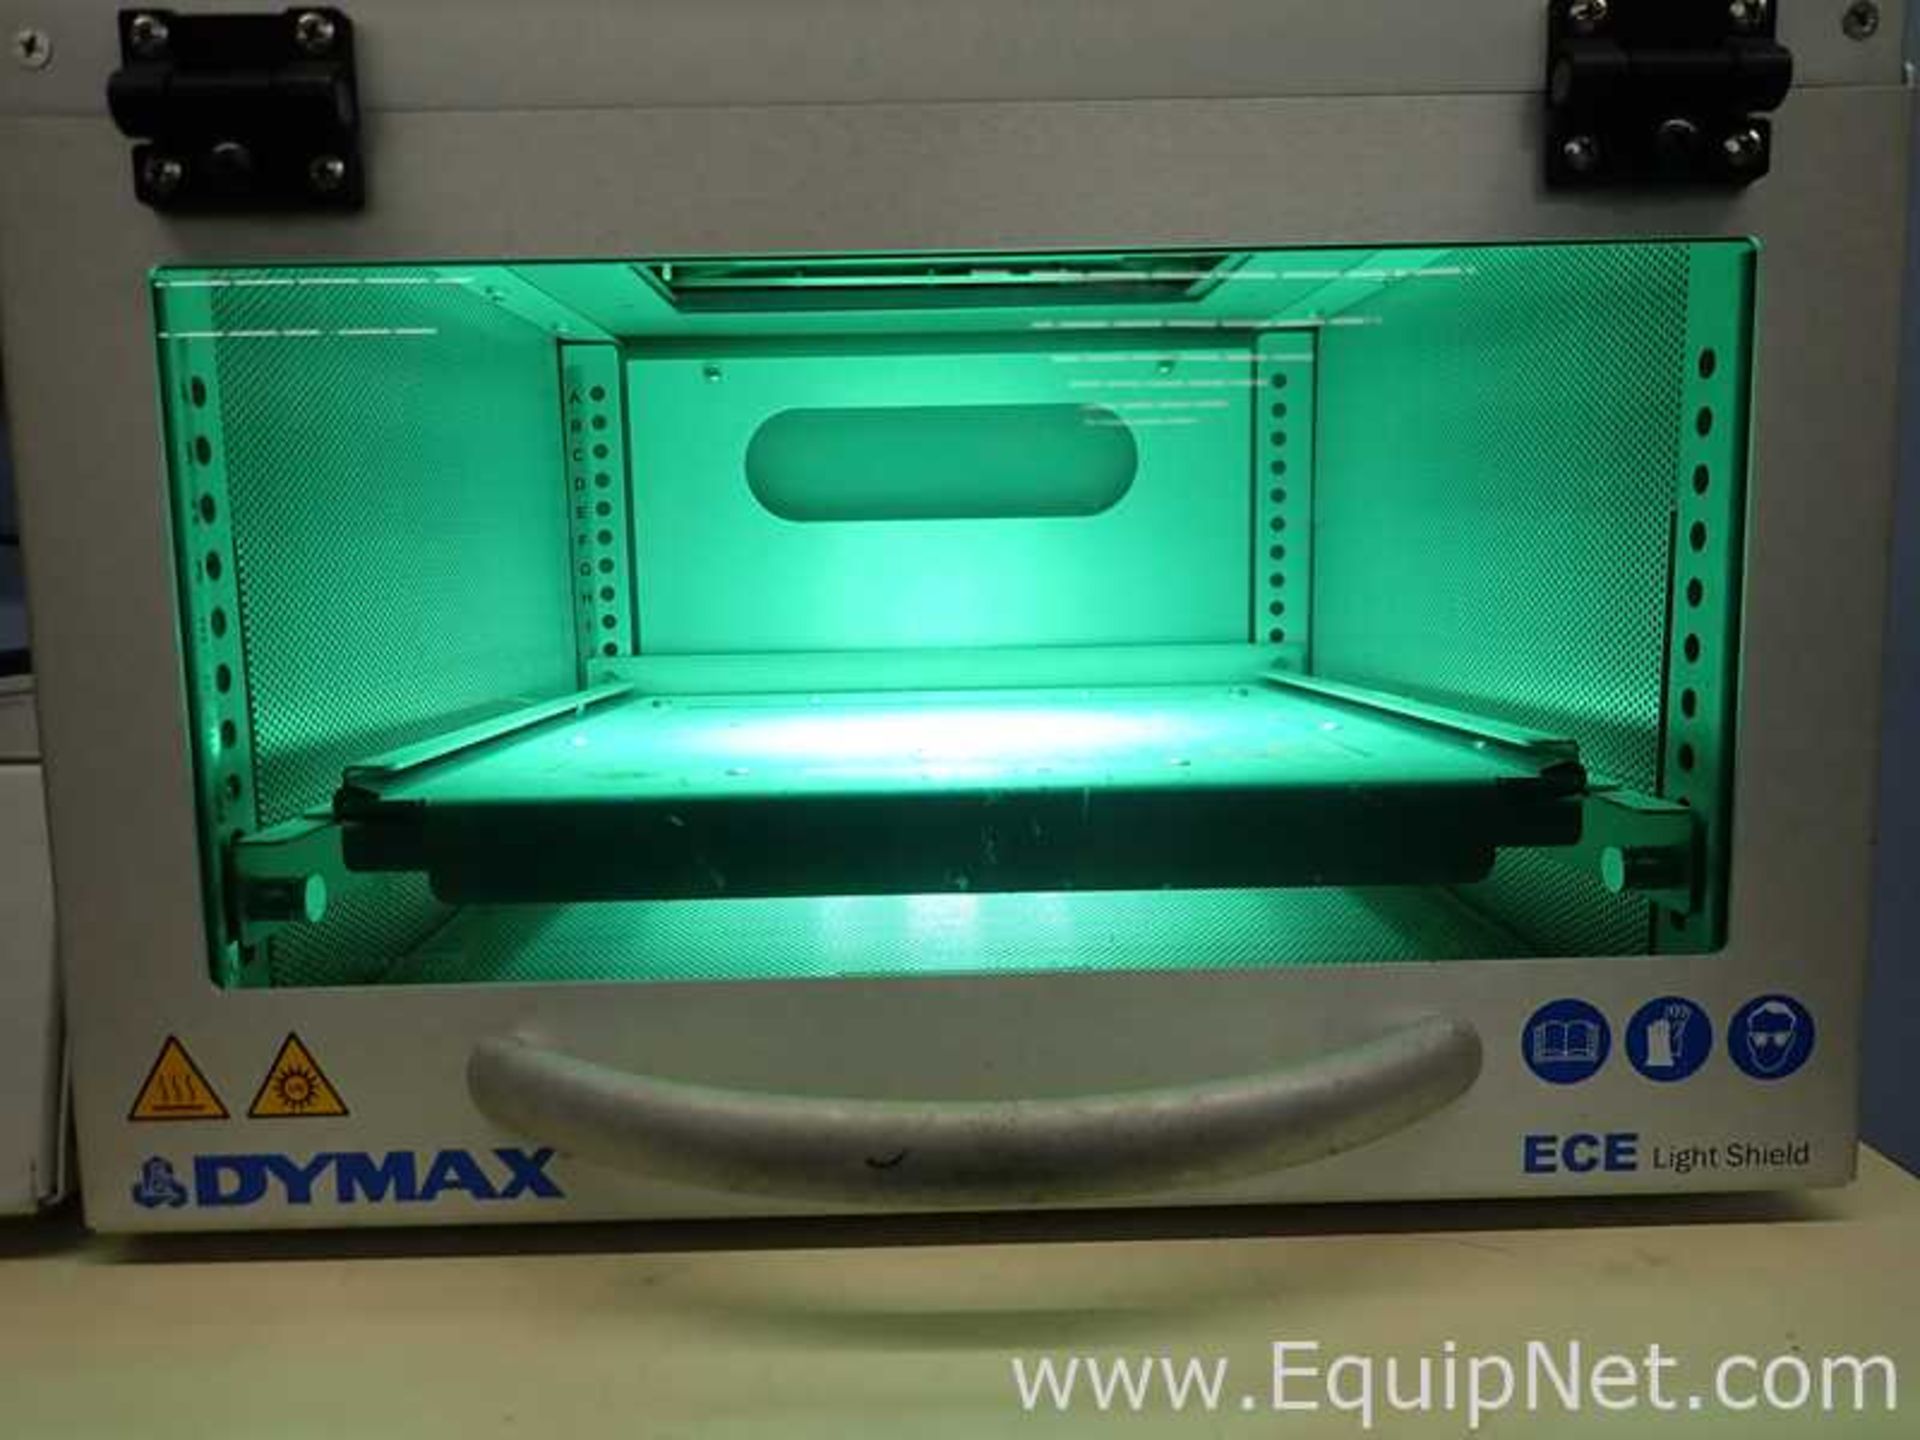 Dymax ECE Series UV Light-Curing Flood Lamp Systems - Image 7 of 31